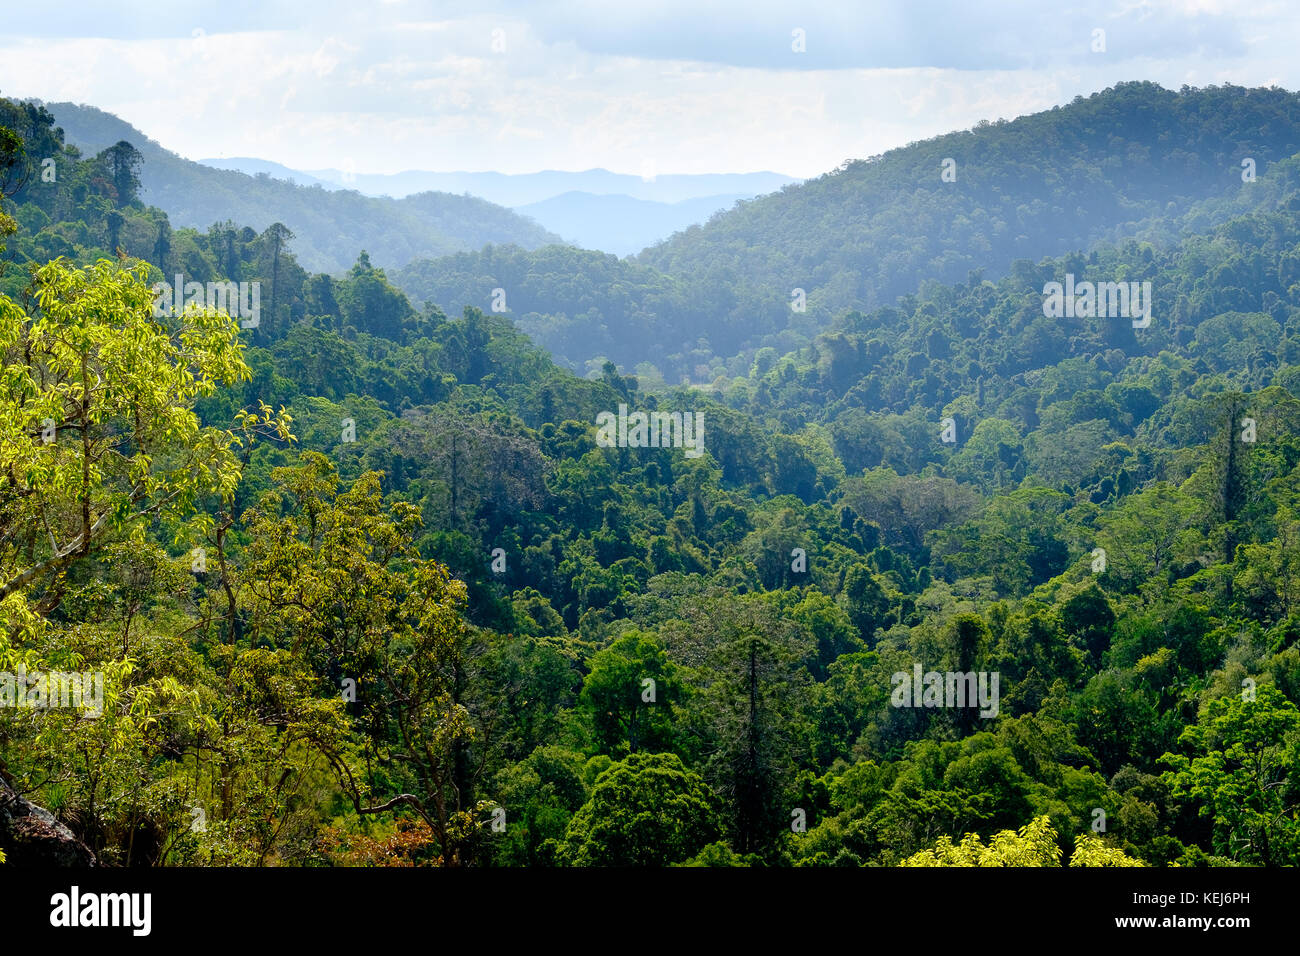 Valley and rainforest forest canopy in the Blackall Range, Kondalilla National Park, Queensland, Australia Stock Photo